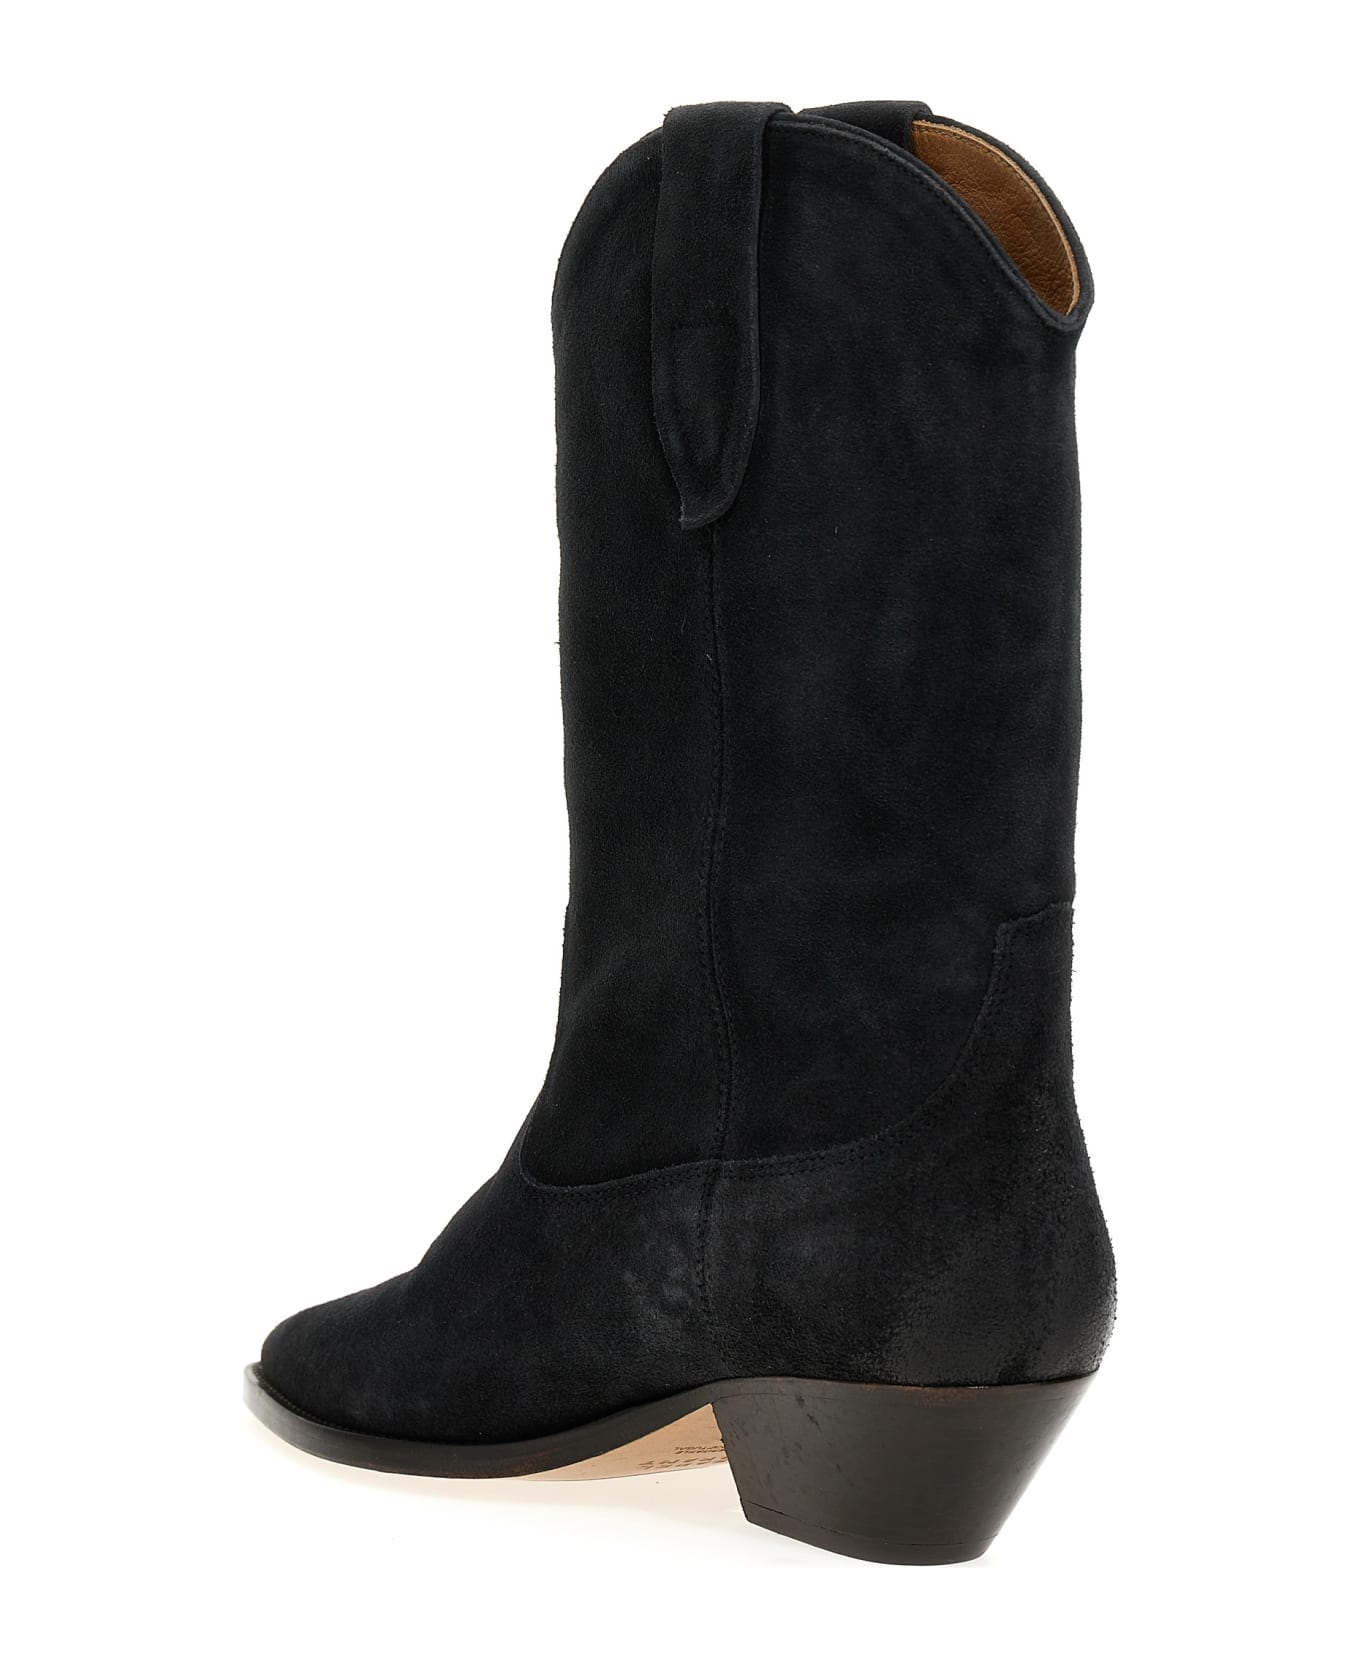 Isabel Marant Duerto Suede Cowboy Boots - FADED BLACK